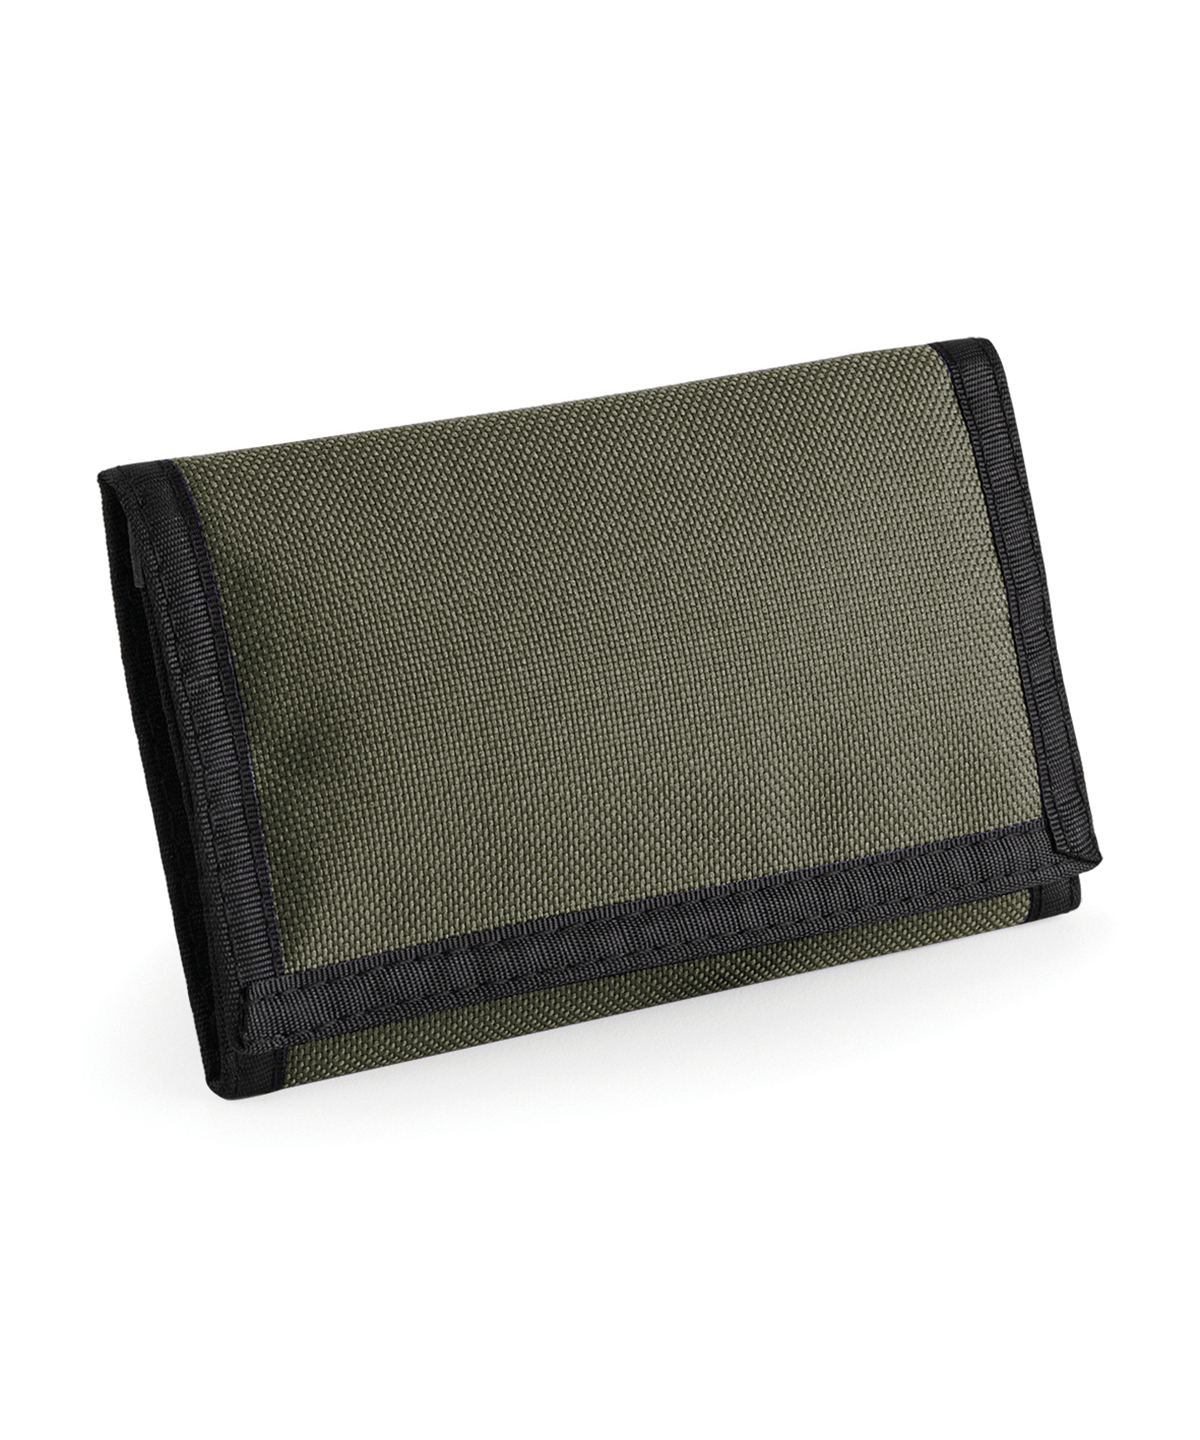 Ripper Wallet Olive Size One Size